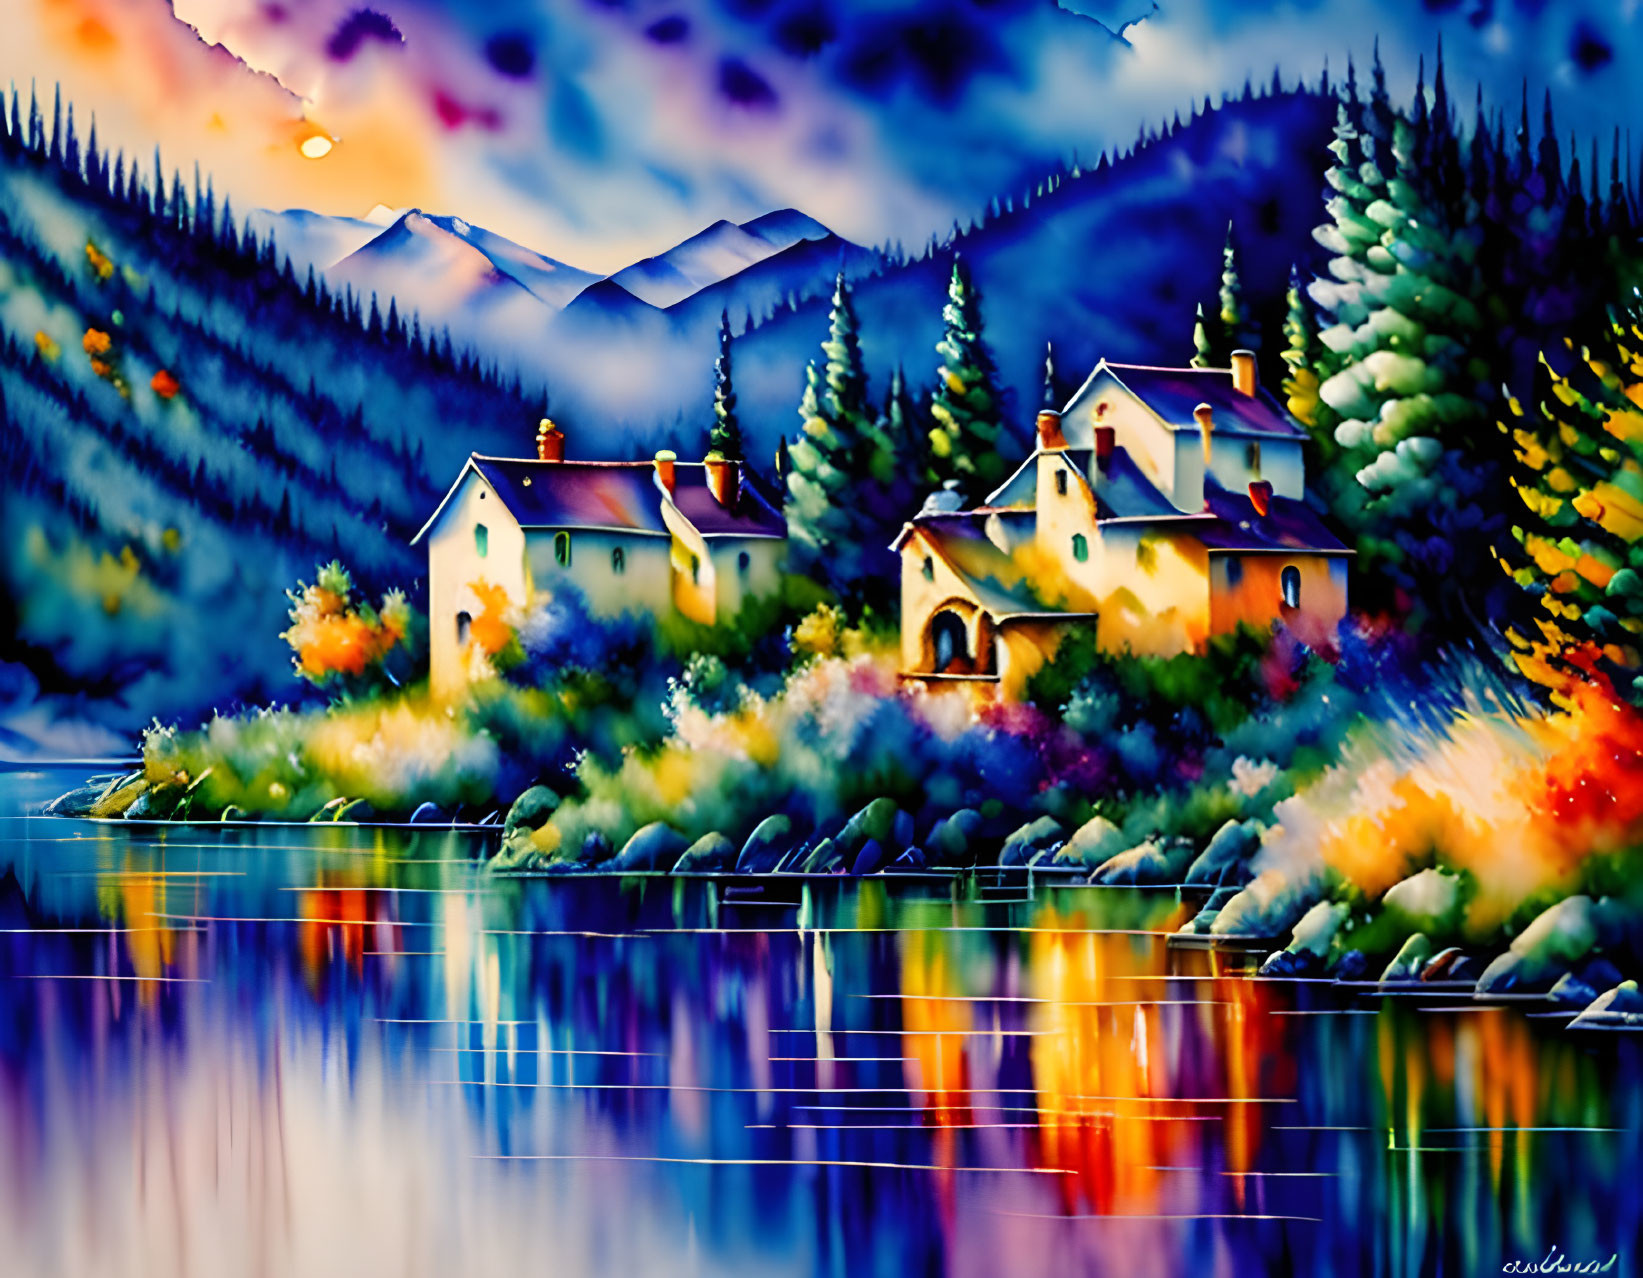 Scenic painting of lakeside houses at dusk with colorful foliage and distant mountains